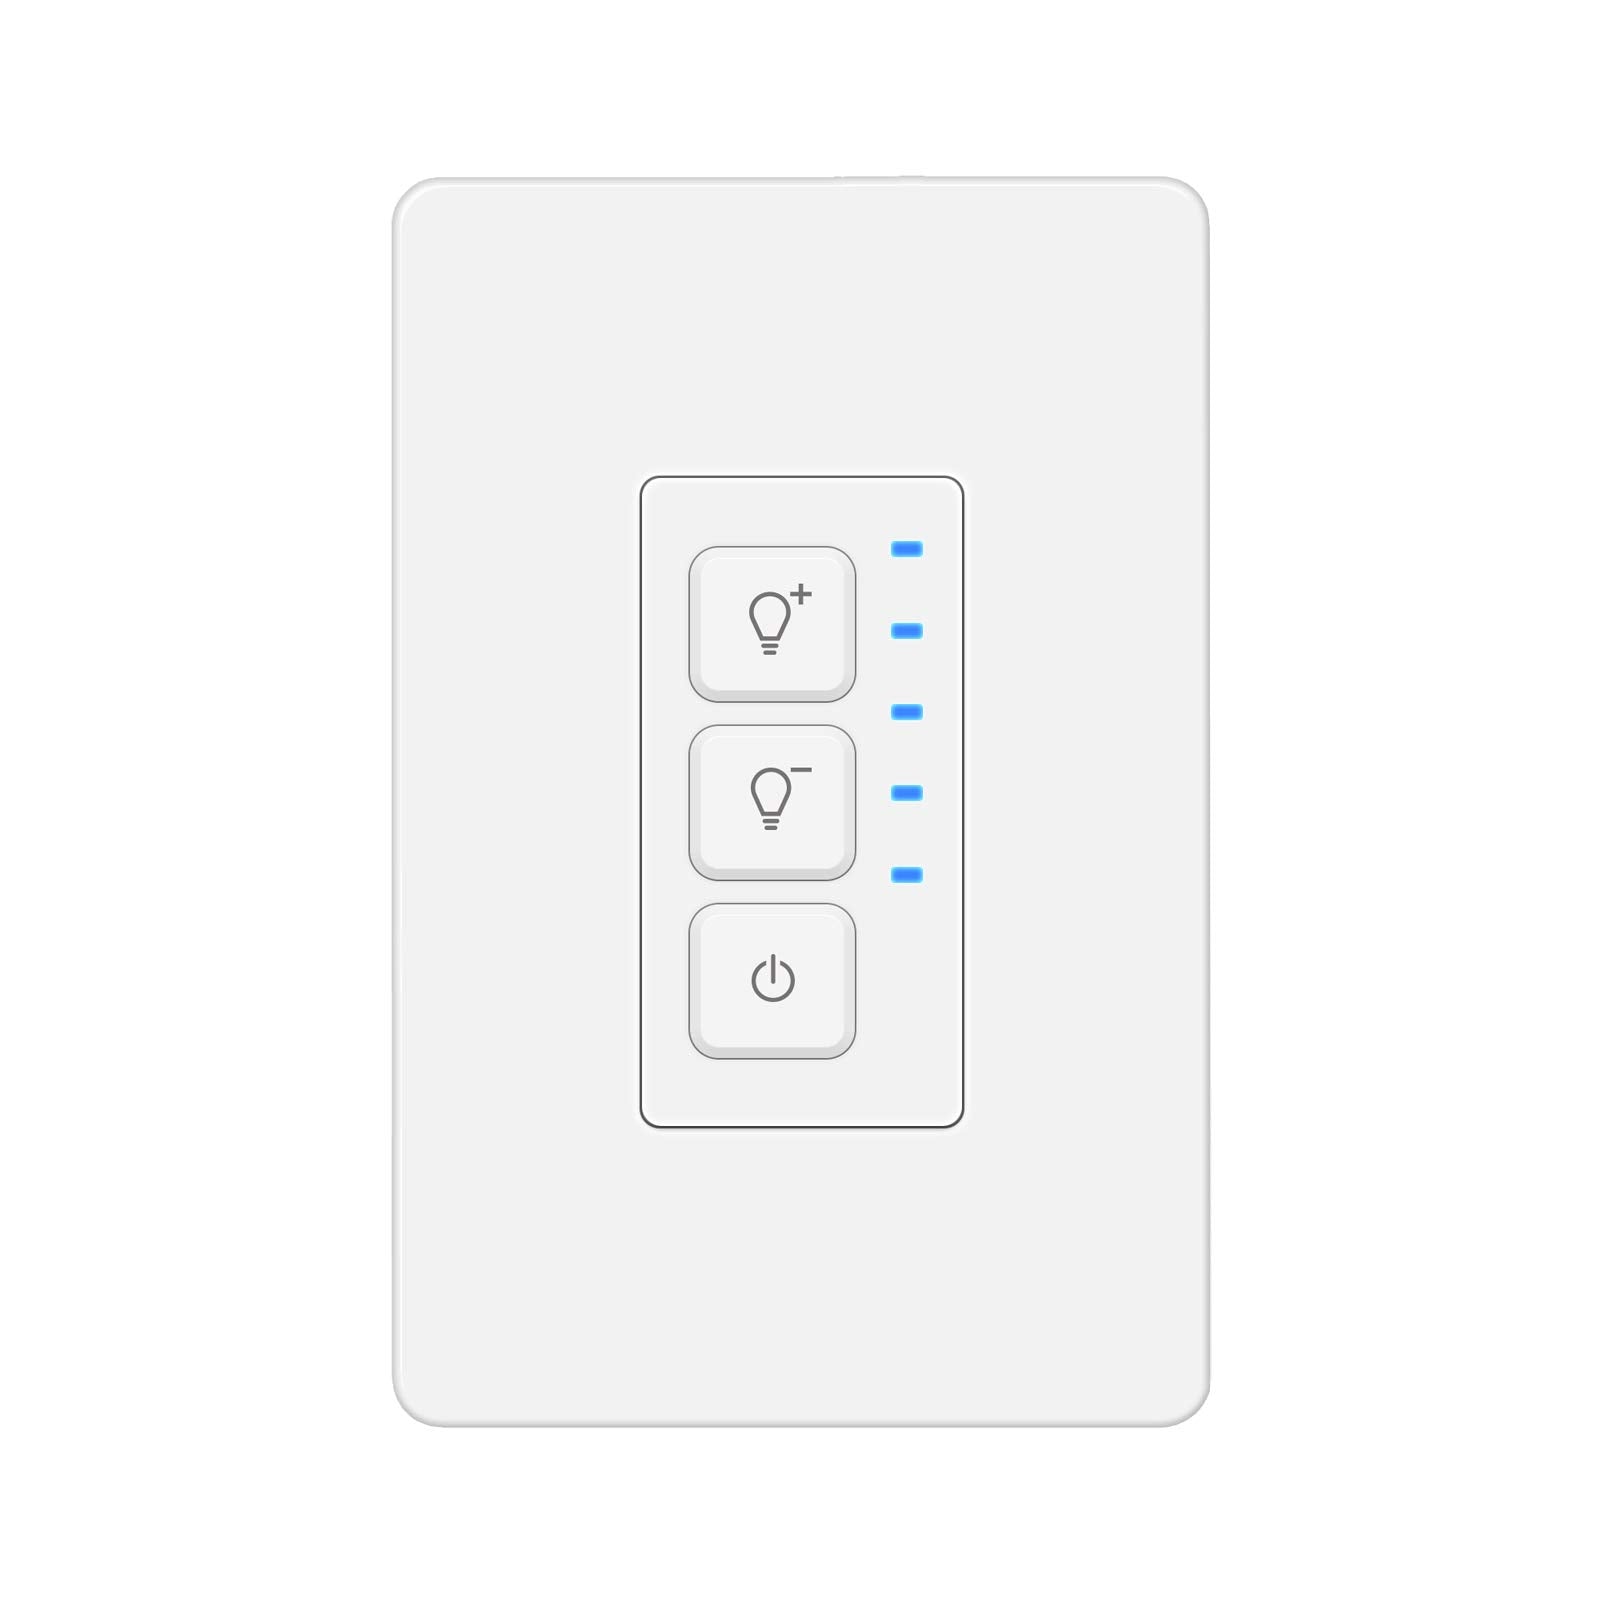 WIFI Switch for Dimmable LED Lights -